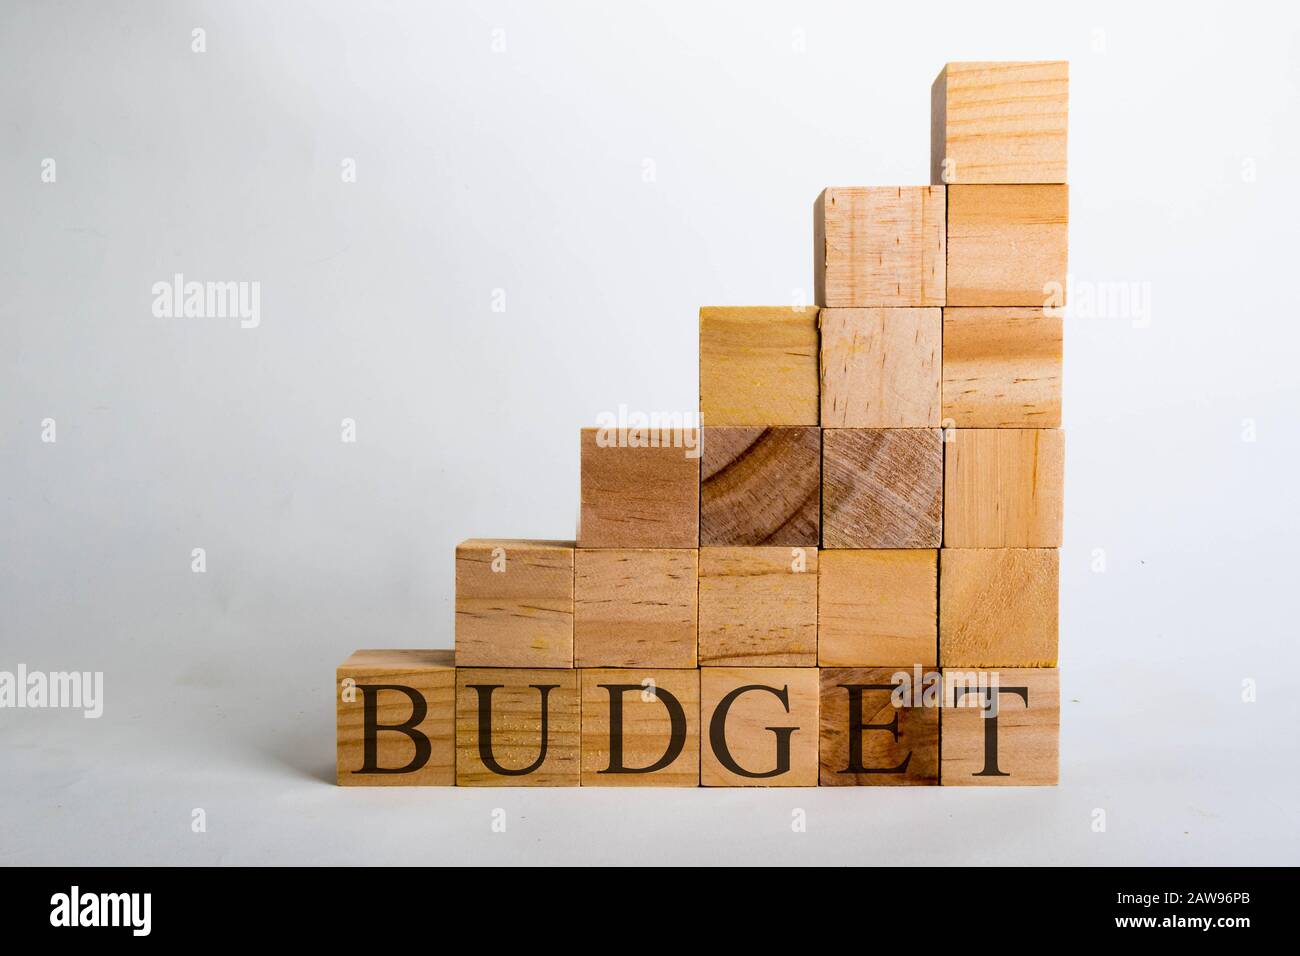 Wooden cubes with lettering spelling Budget shaped like a graph. Business or political concept Stock Photo